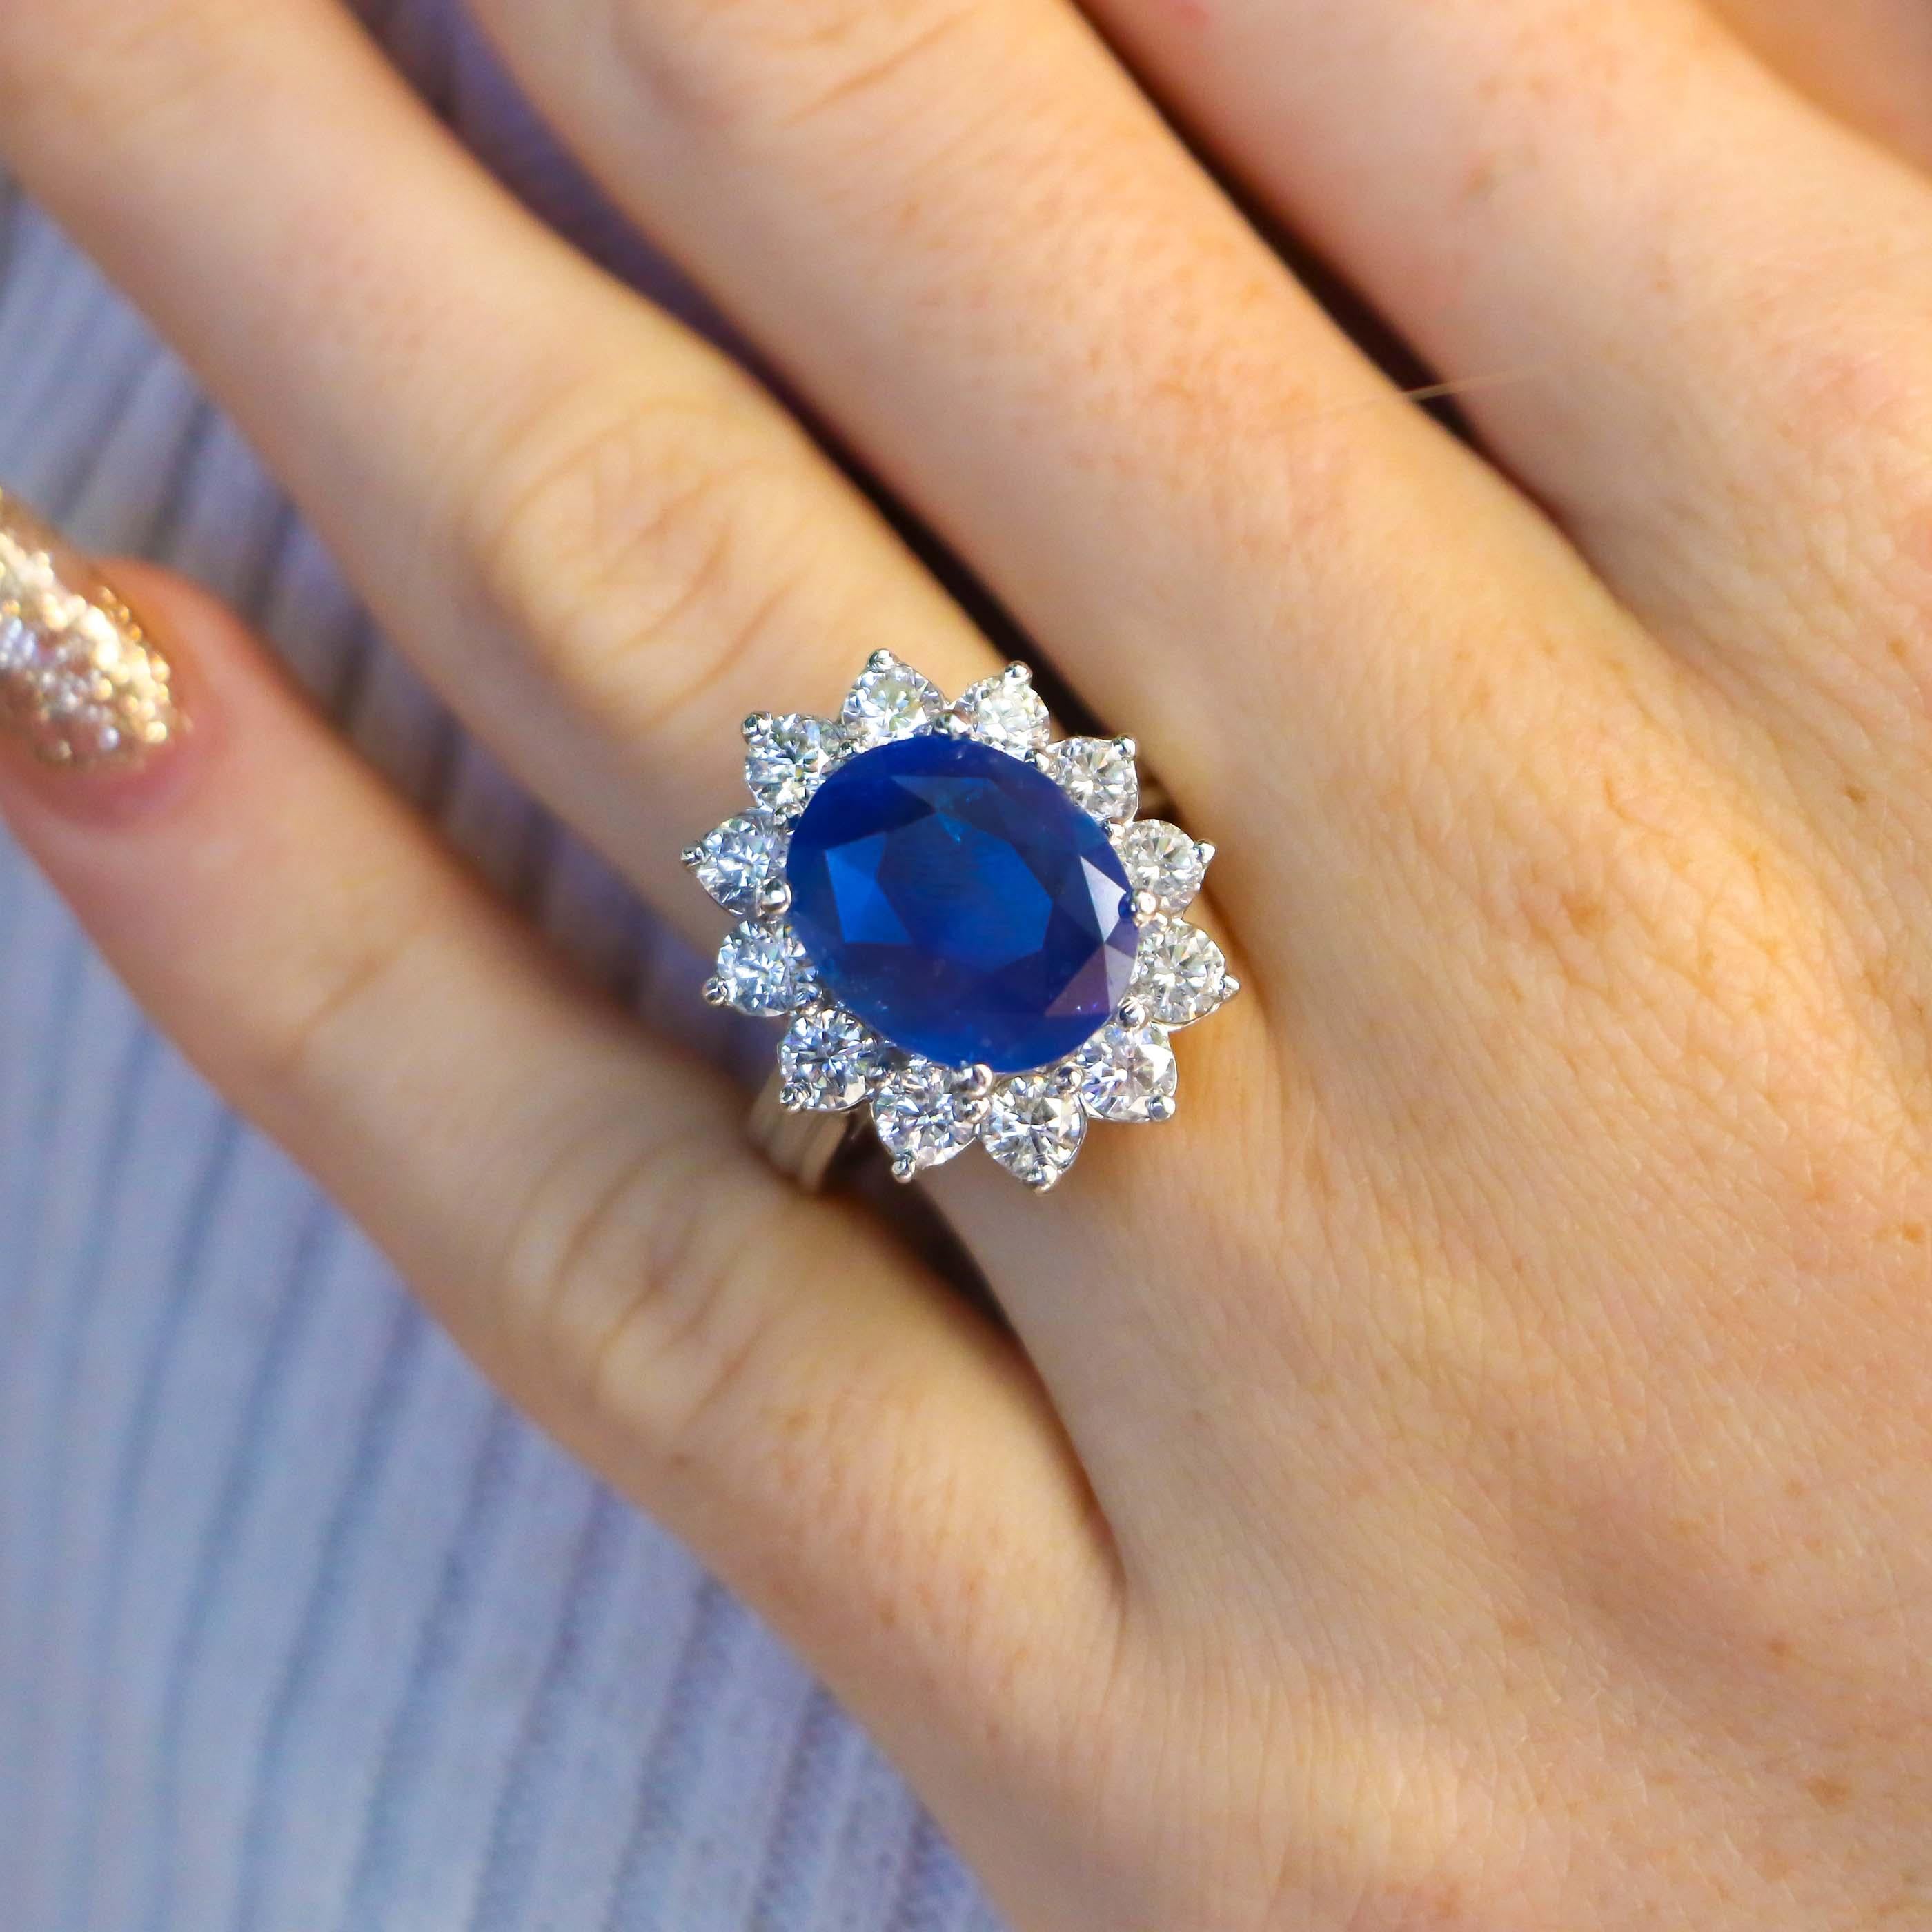 Mesmerizing large GIA Certified Blue Ceylon Sapphire Ring with a halo of round diamonds. This beautiful cocktail sapphire ring is a great accent of sophistication. It would be a great engagement ring for a sapphire lover! The outside circle of